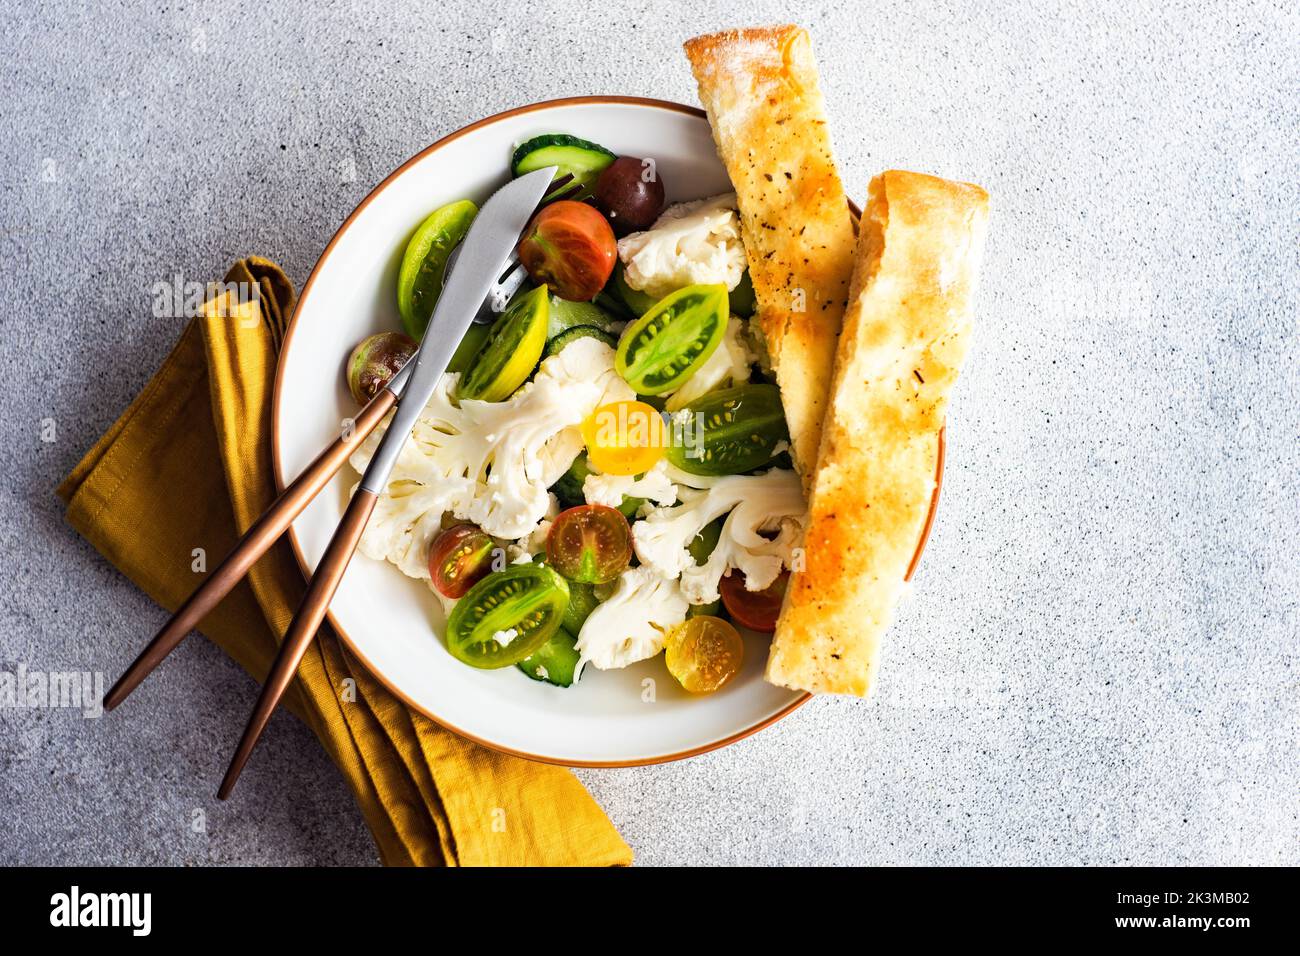 Healthy vegetable salad in the bowl and fresh baked focaccia bread served on concrete table Stock Photo